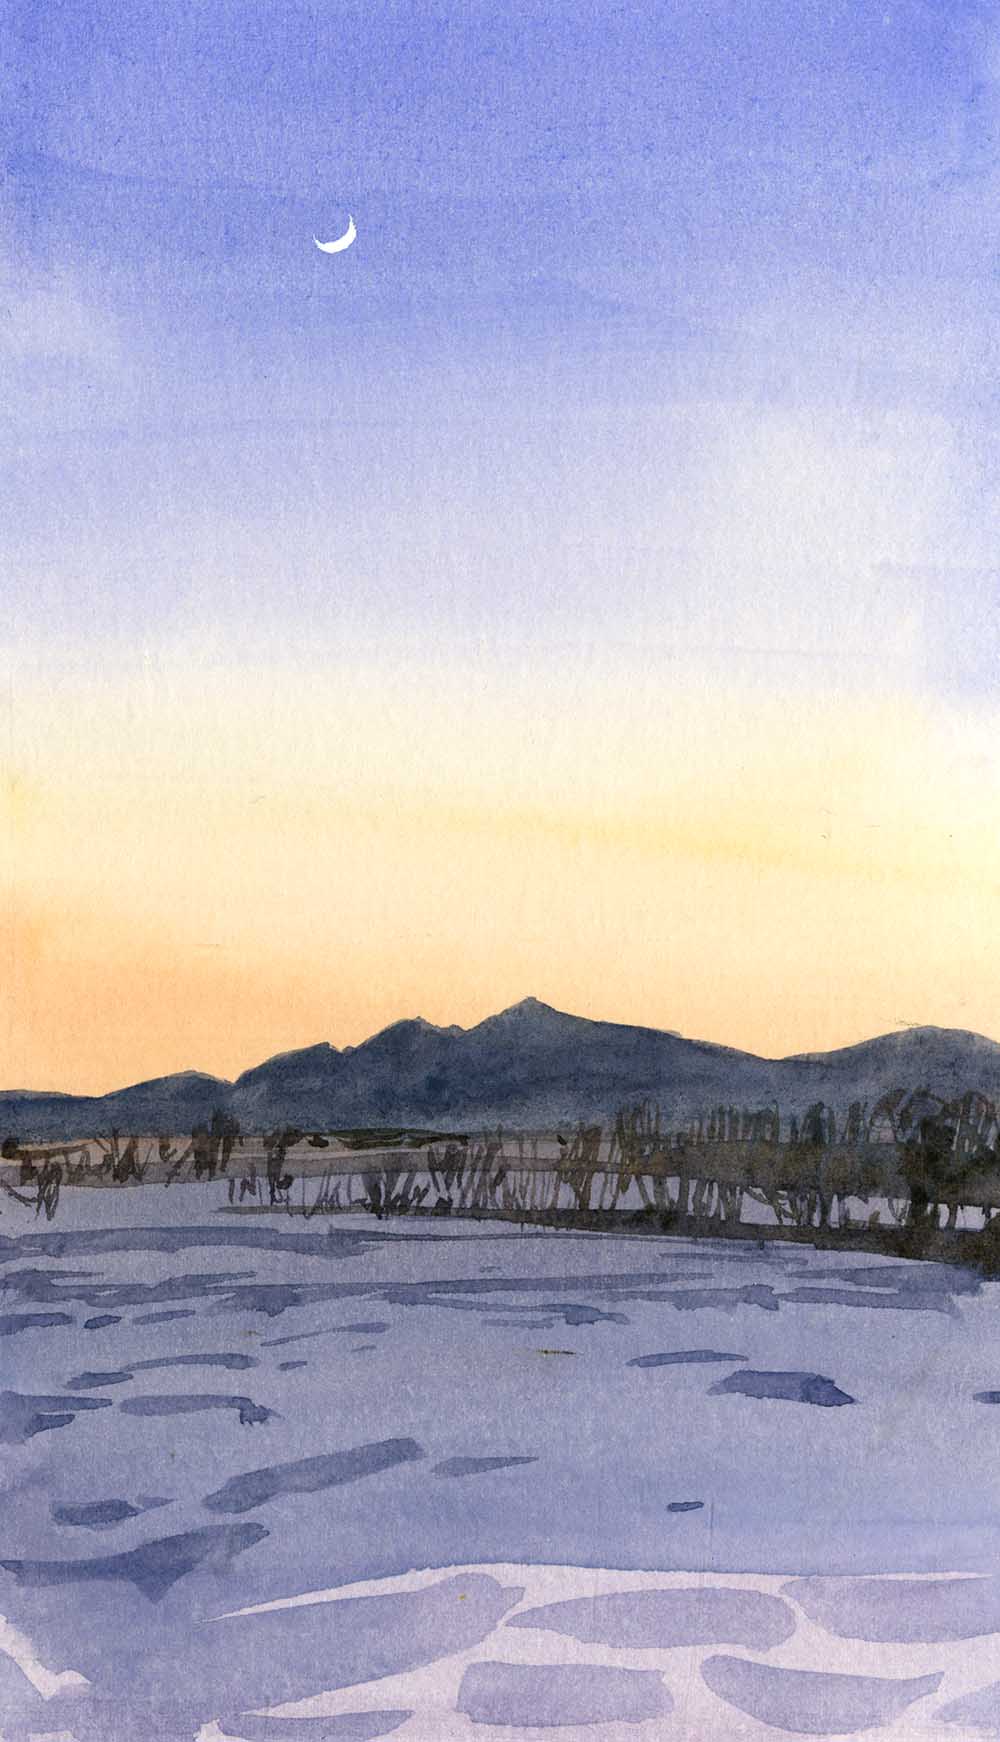 Watercolor painting of a blue snowy field in twilight. In the background are dark mountains and a bright sky with crescent moon.